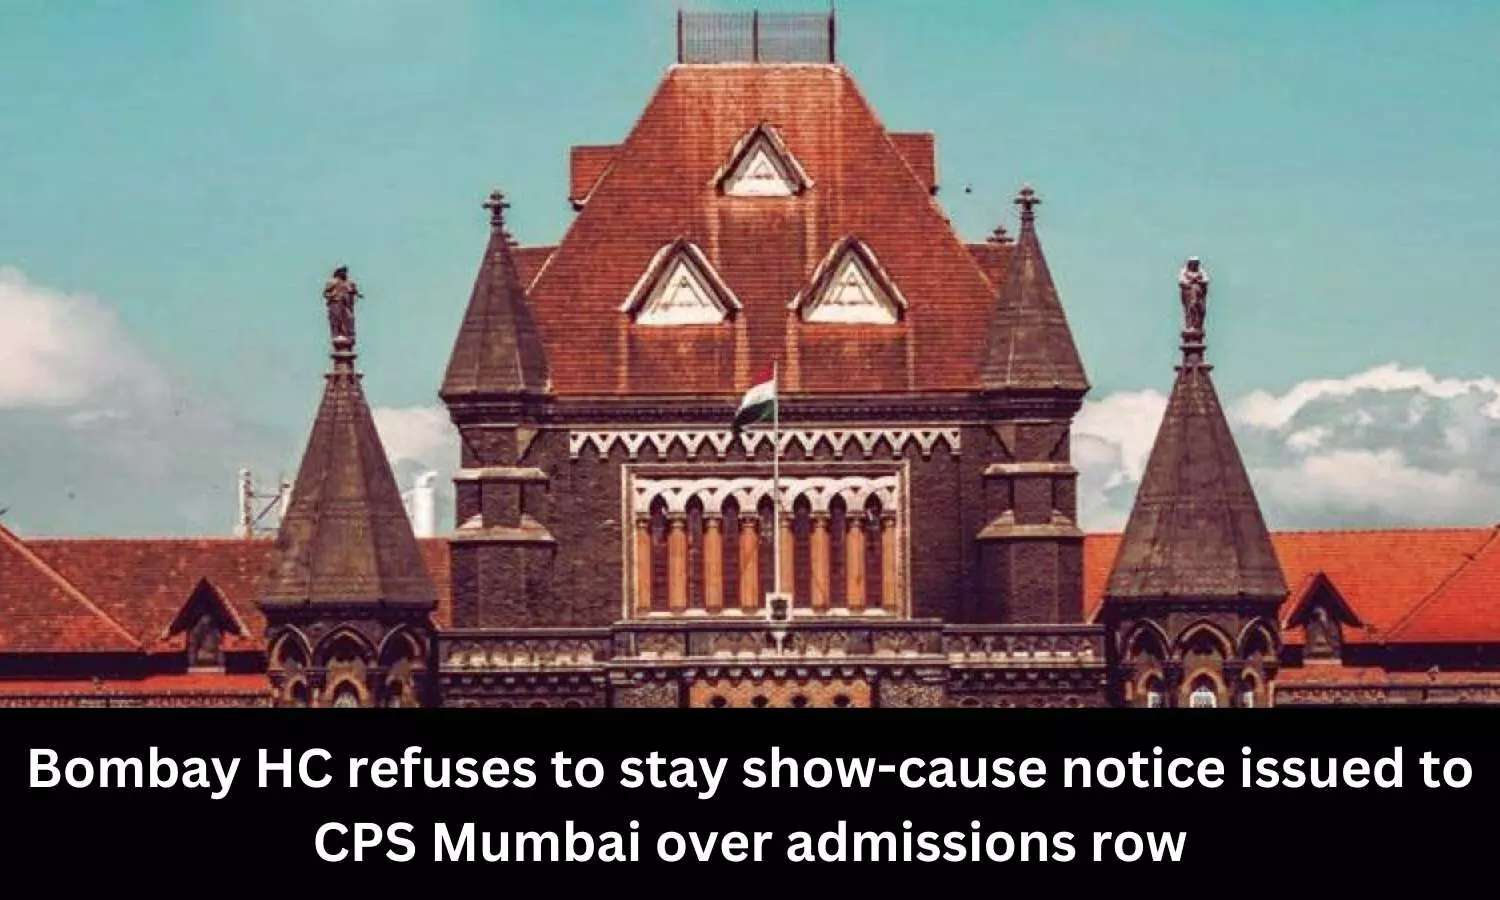 Bombay High Court refuses to stay show-cause notice issued to CPS Mumbai over admissions row